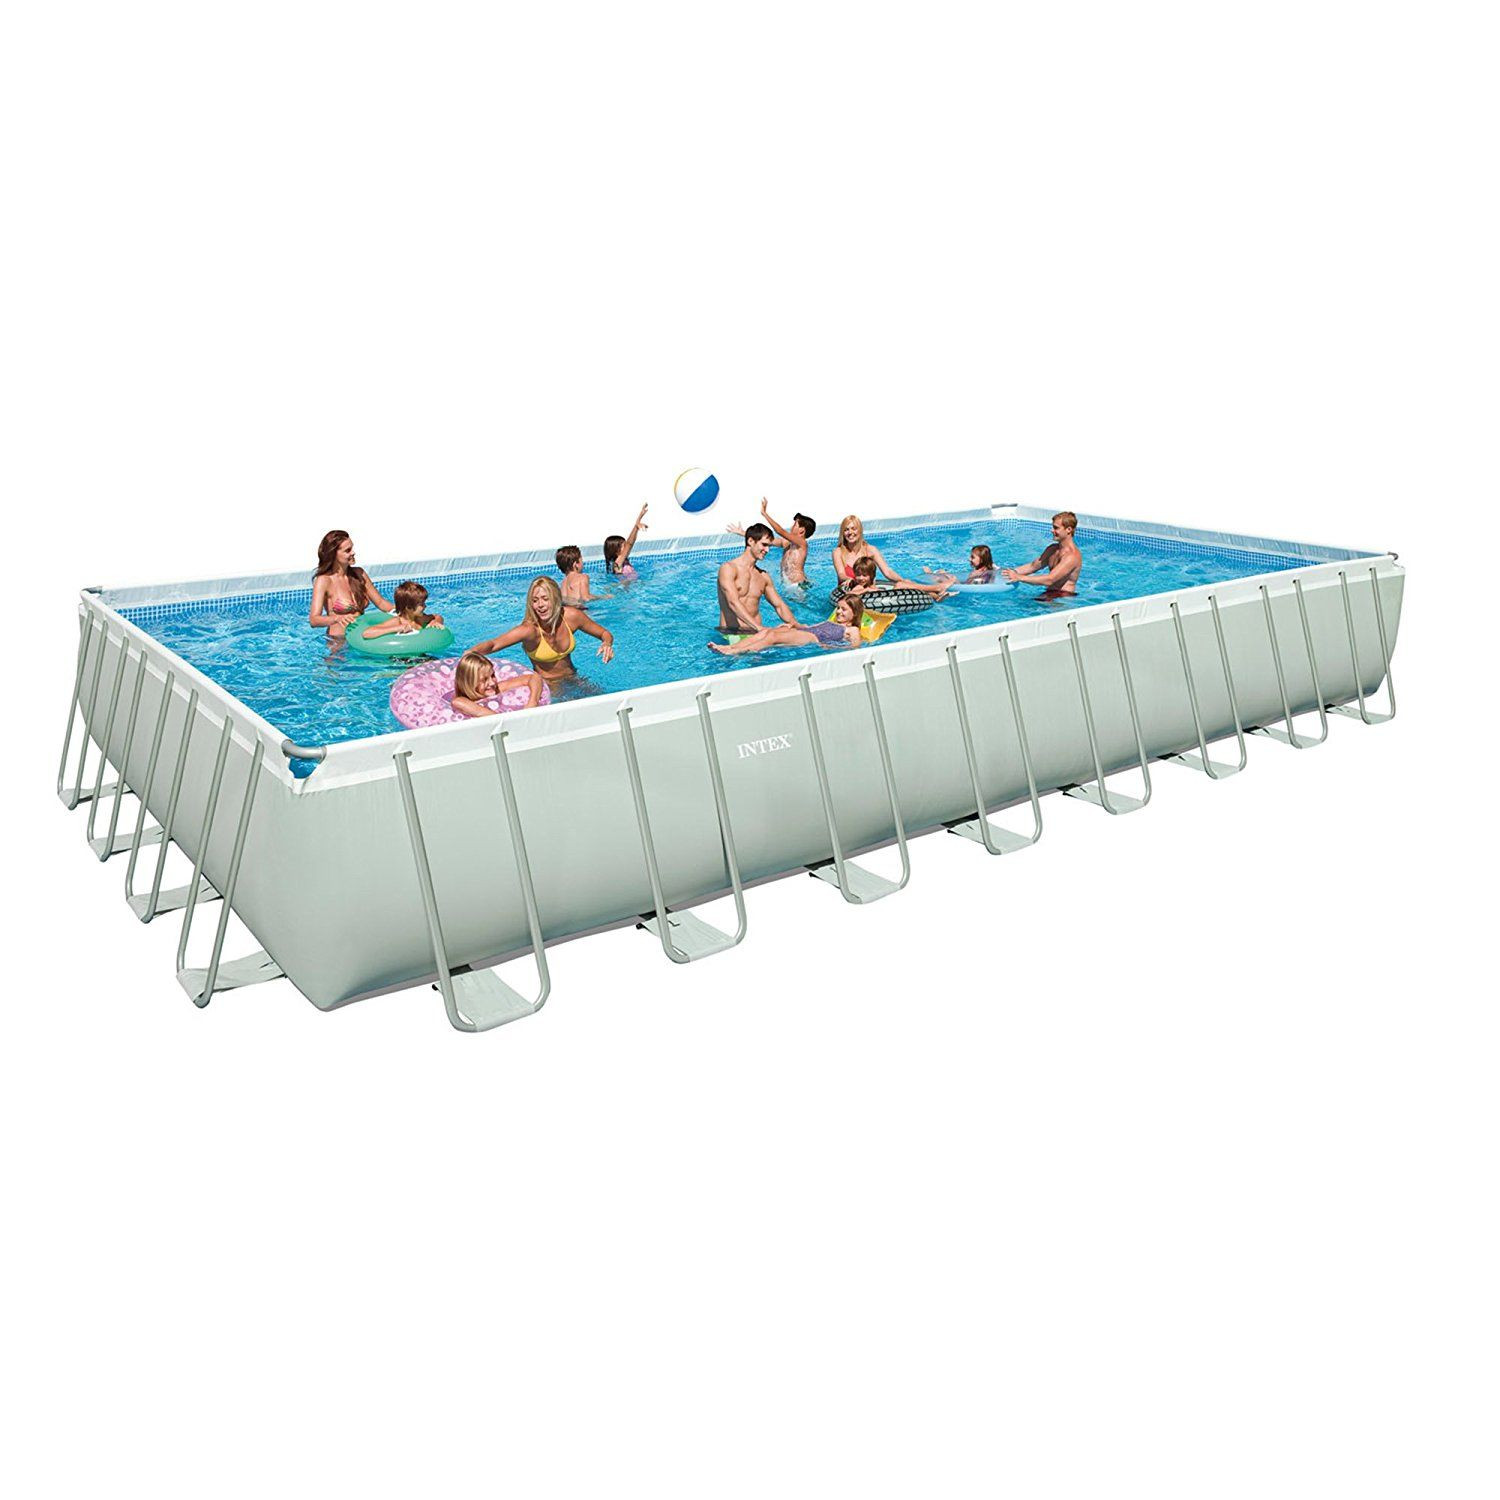 Intex Pool Accessories Above Ground
 Intex Ultra Frame Rectangular Pool Review Best